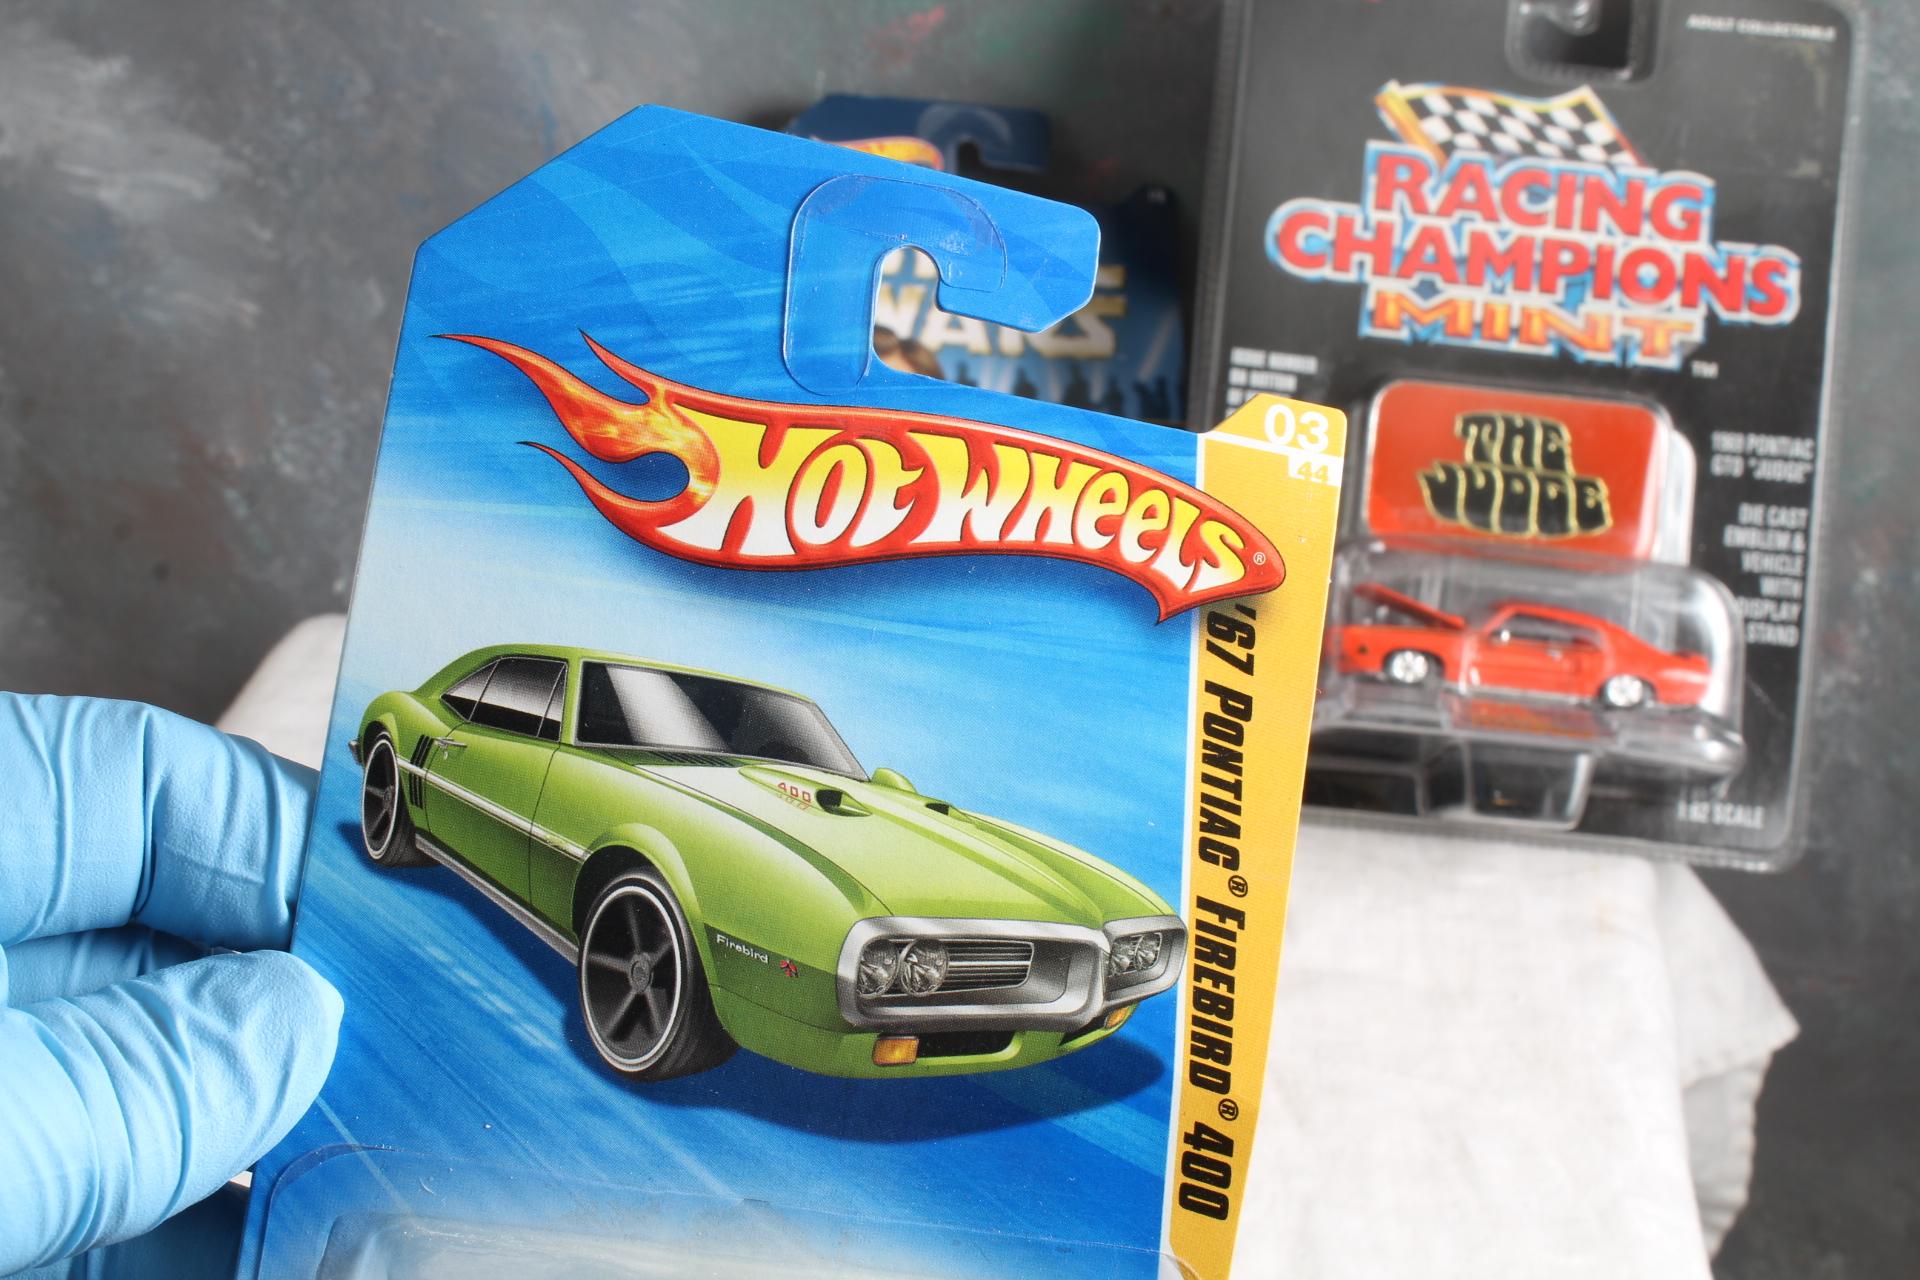 3 New/Old Stock Diecast Cars The Judge '69 Pontiac GTO with Emblem, Hot